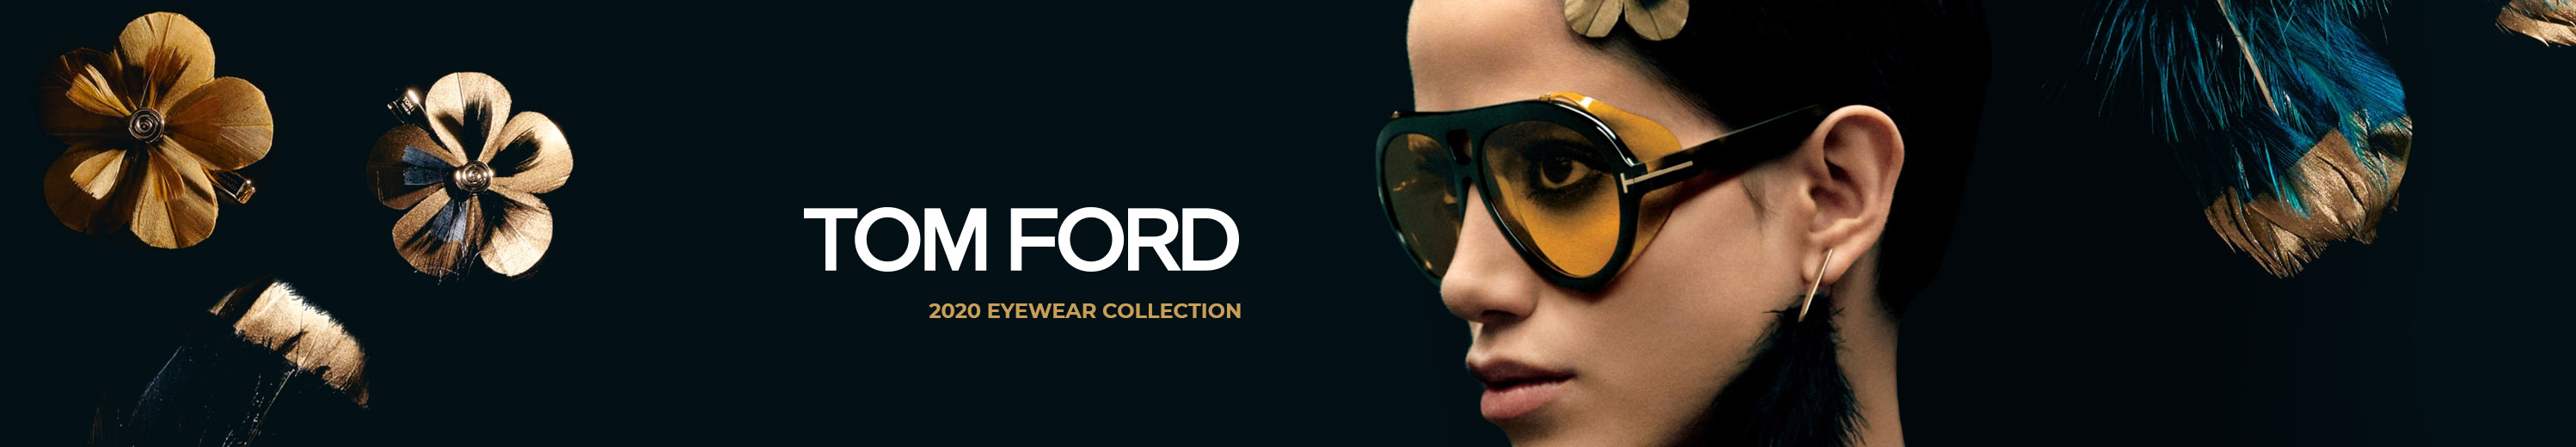 Tom Ford 2020 Eyewear Collection